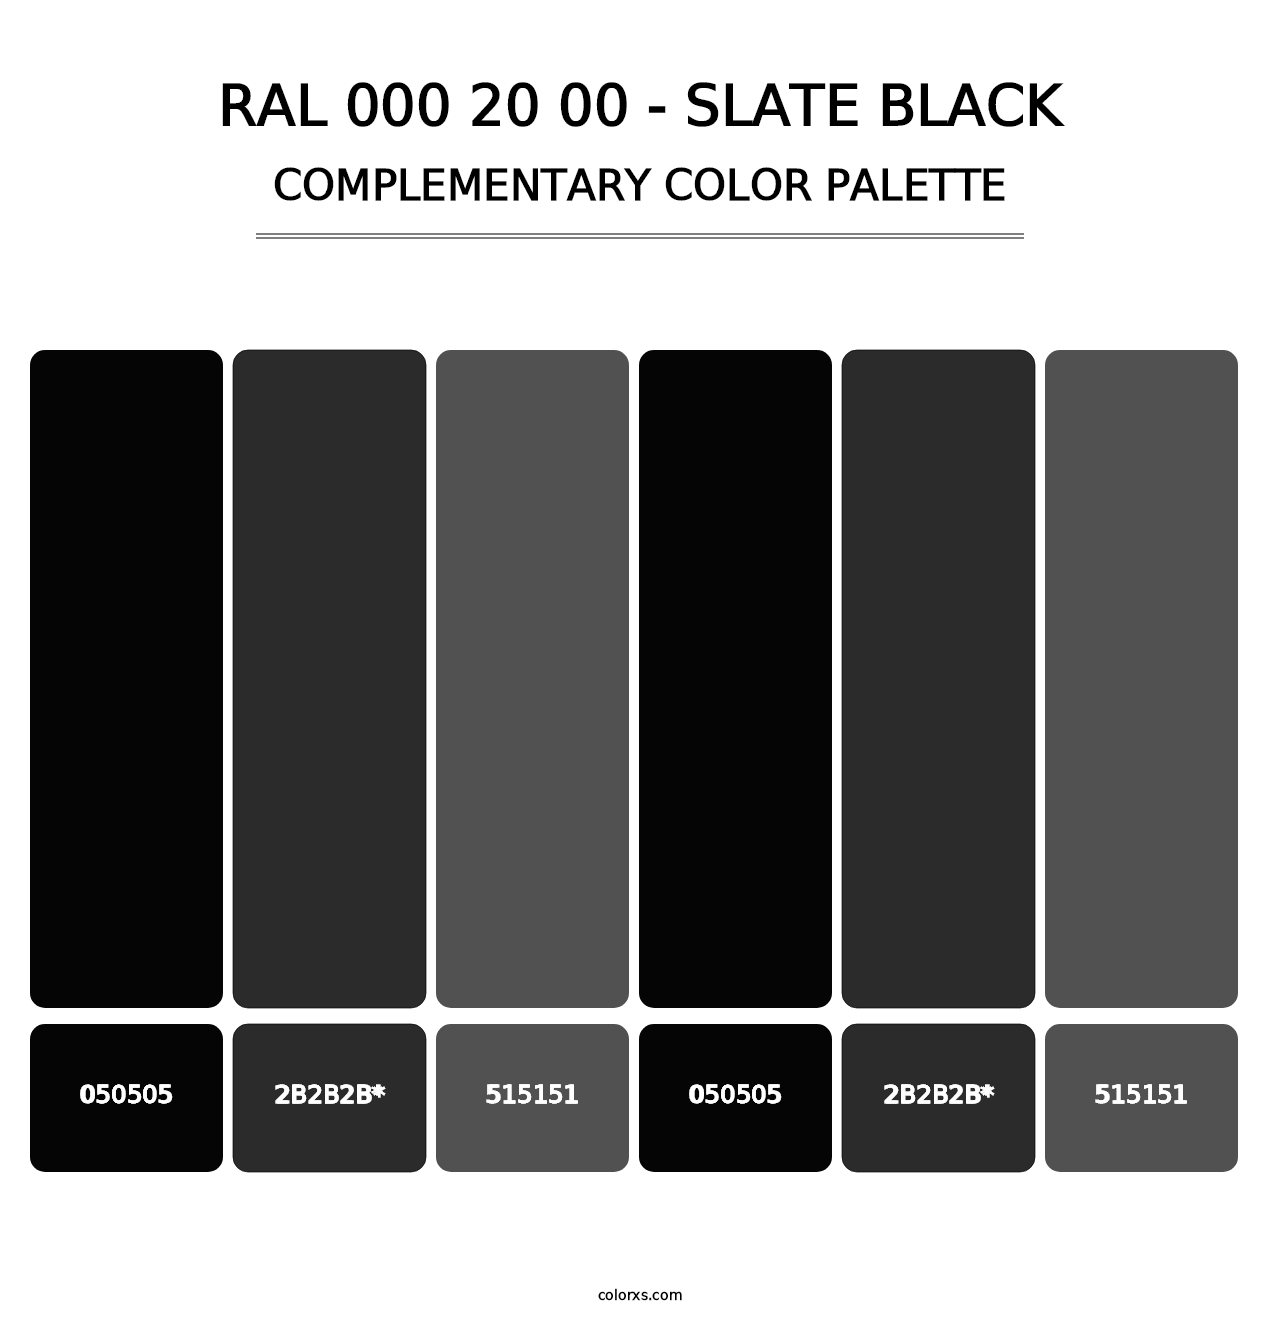 RAL 000 20 00 - Slate Black - Complementary Color Palette